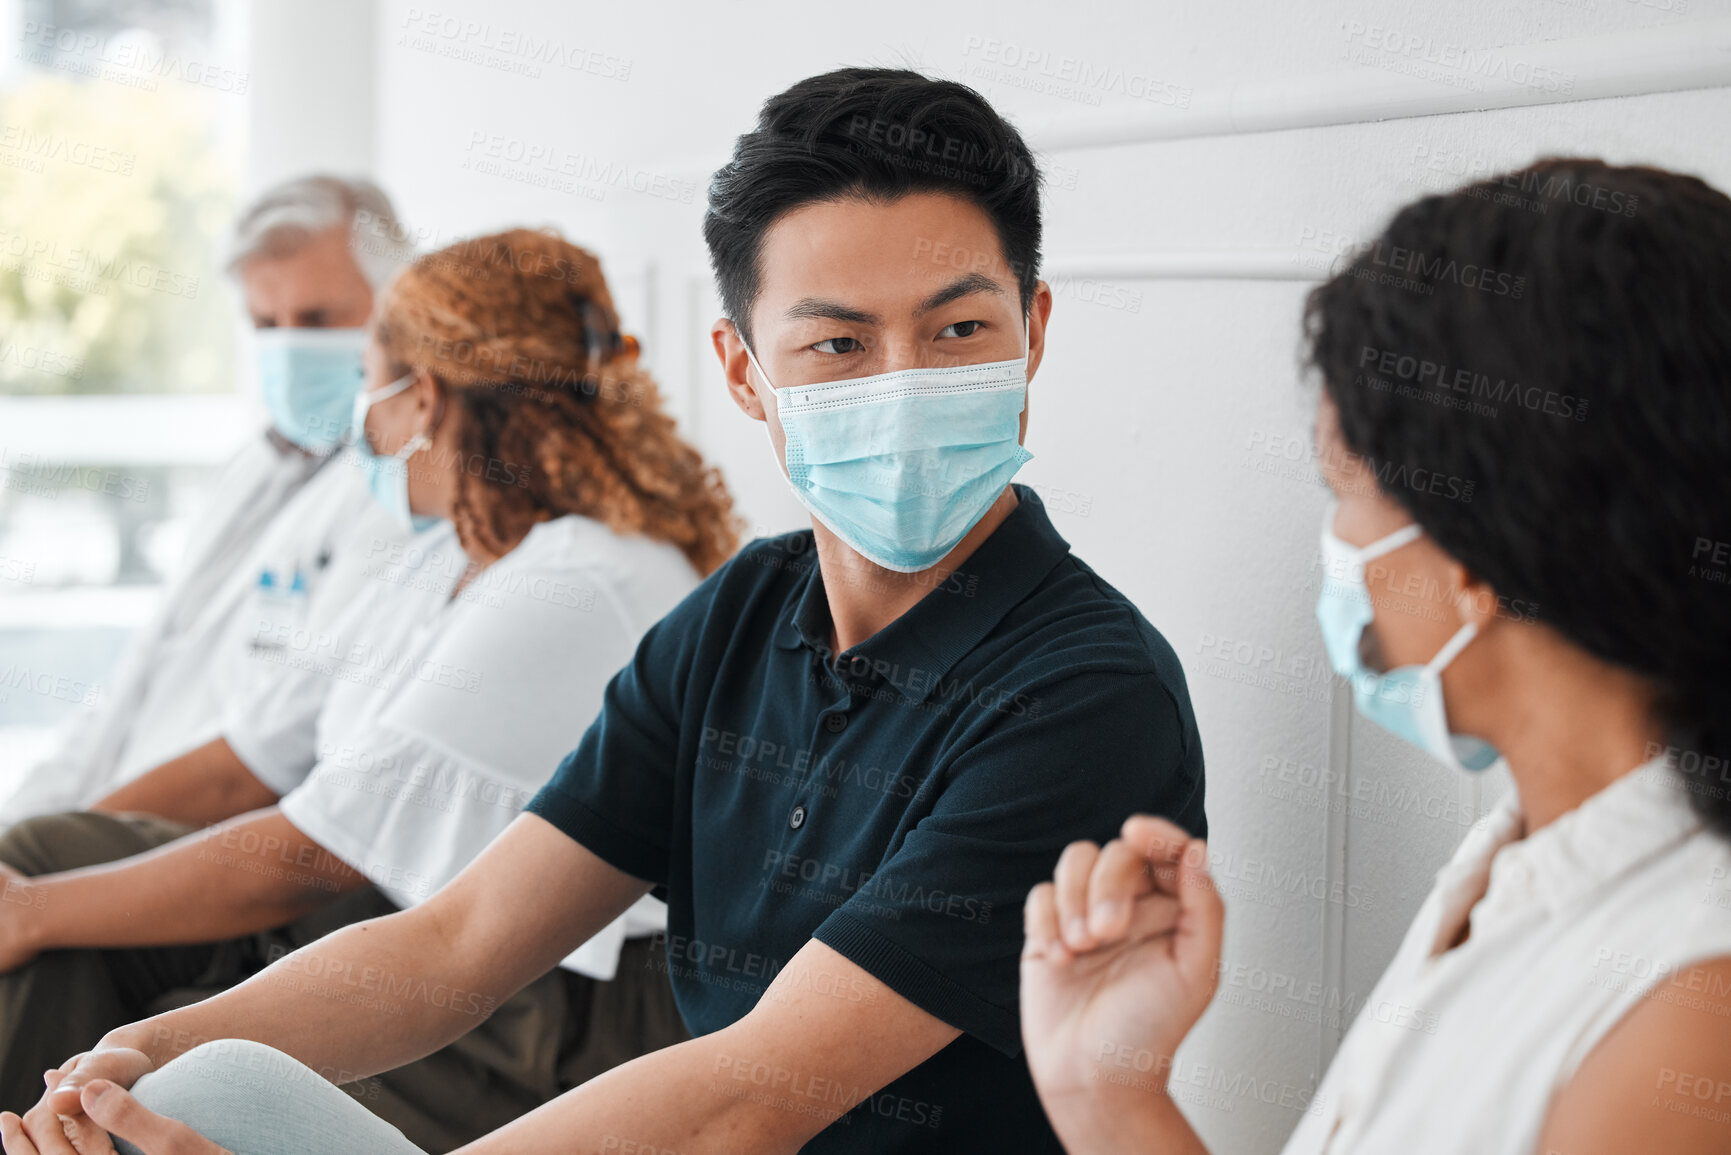 Buy stock photo Shot of a group of people wearing face masks while sitting in a queue